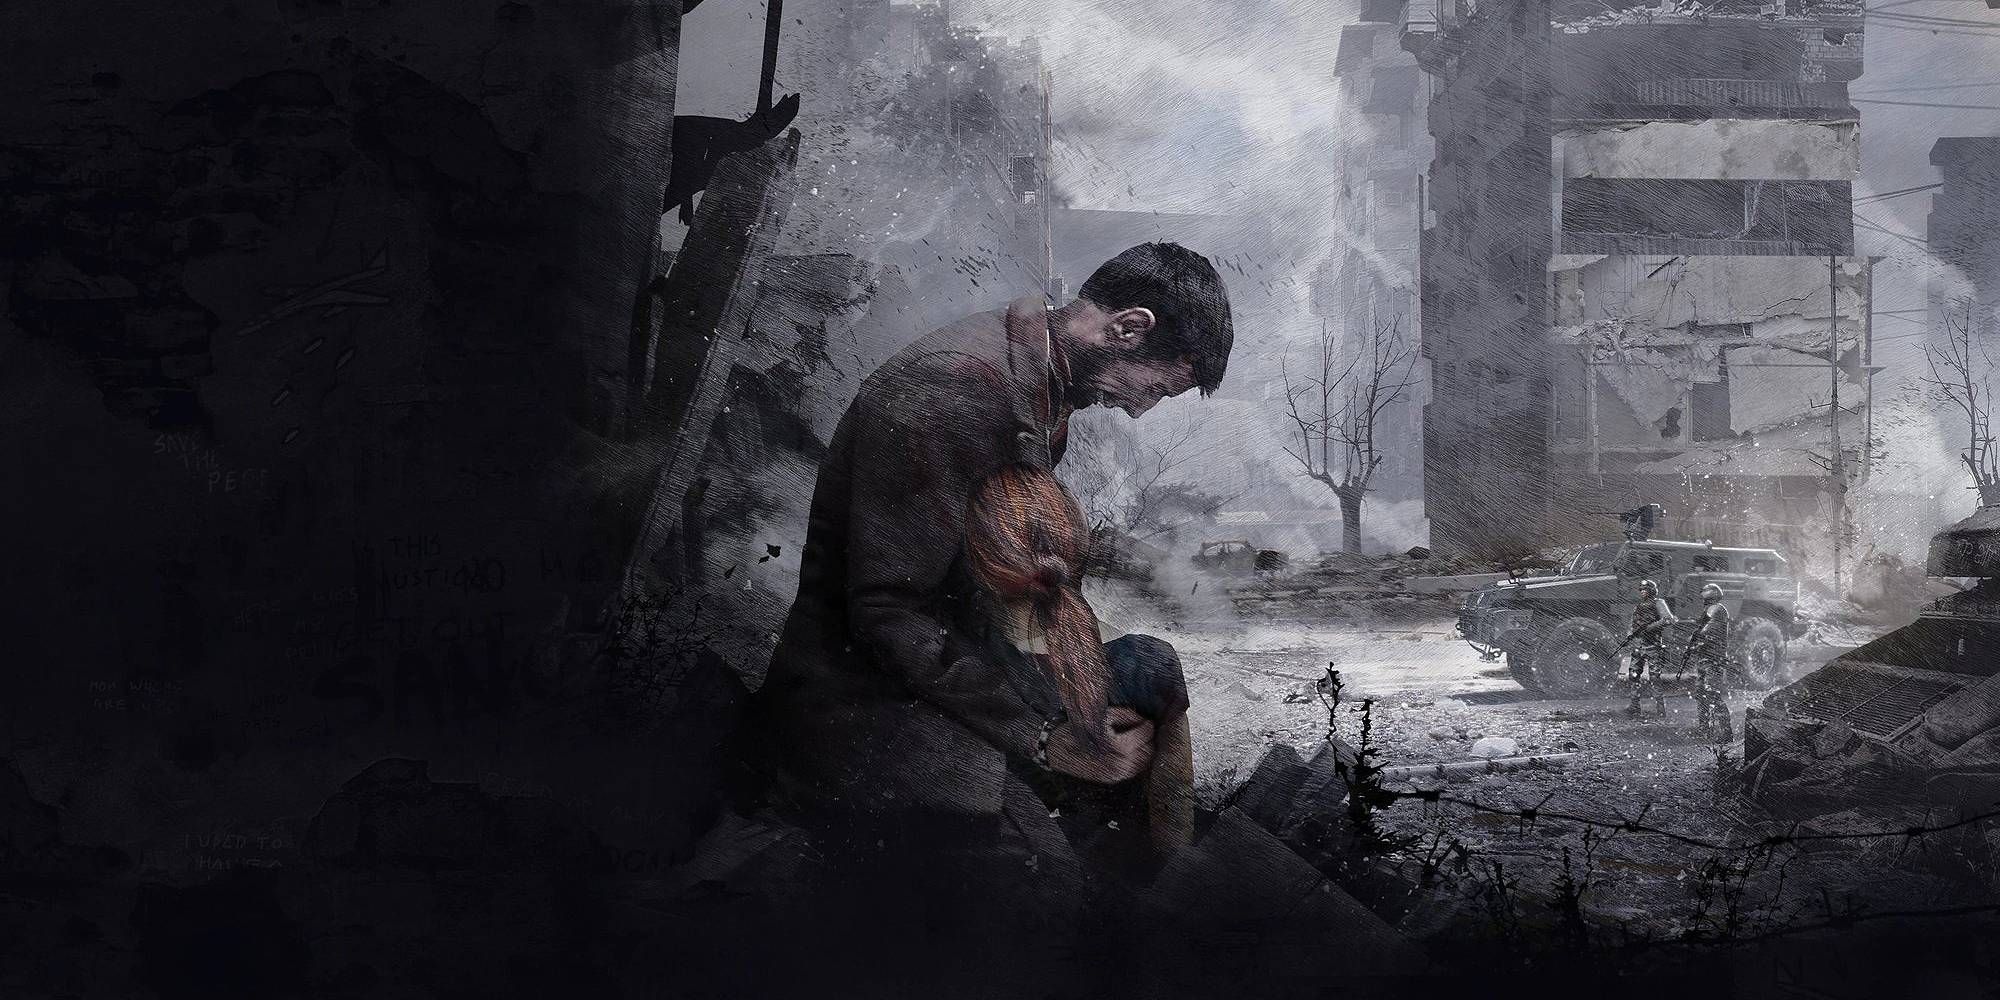 A man mourns a woman in his arms amidst a war zone in This War of Mine: Final Cut art